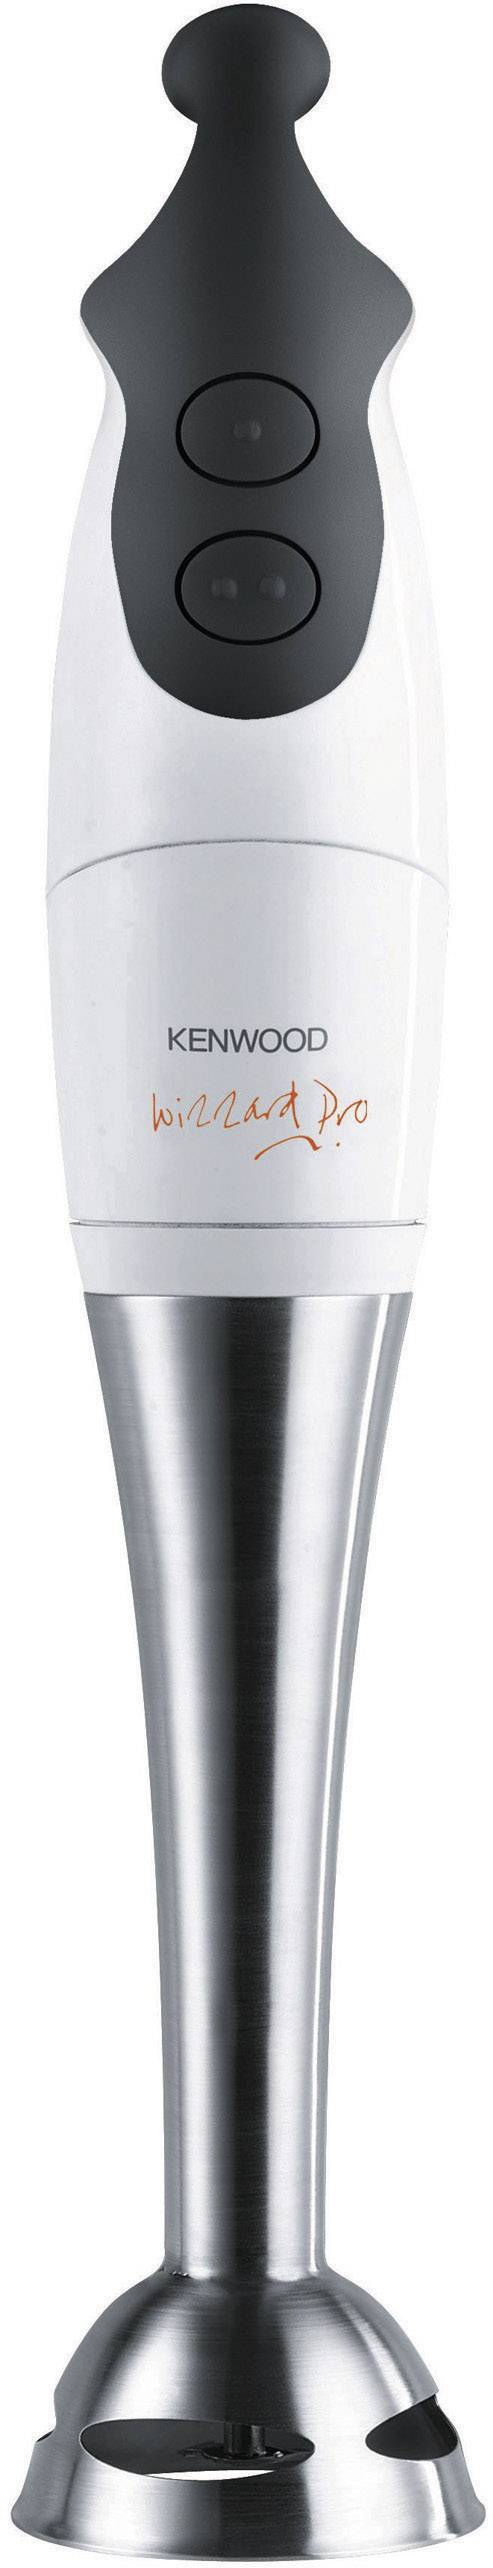 Kenwood Home Appliance Hand-held blender 400 W with mixing jar White, Stainless steel | Conrad.com